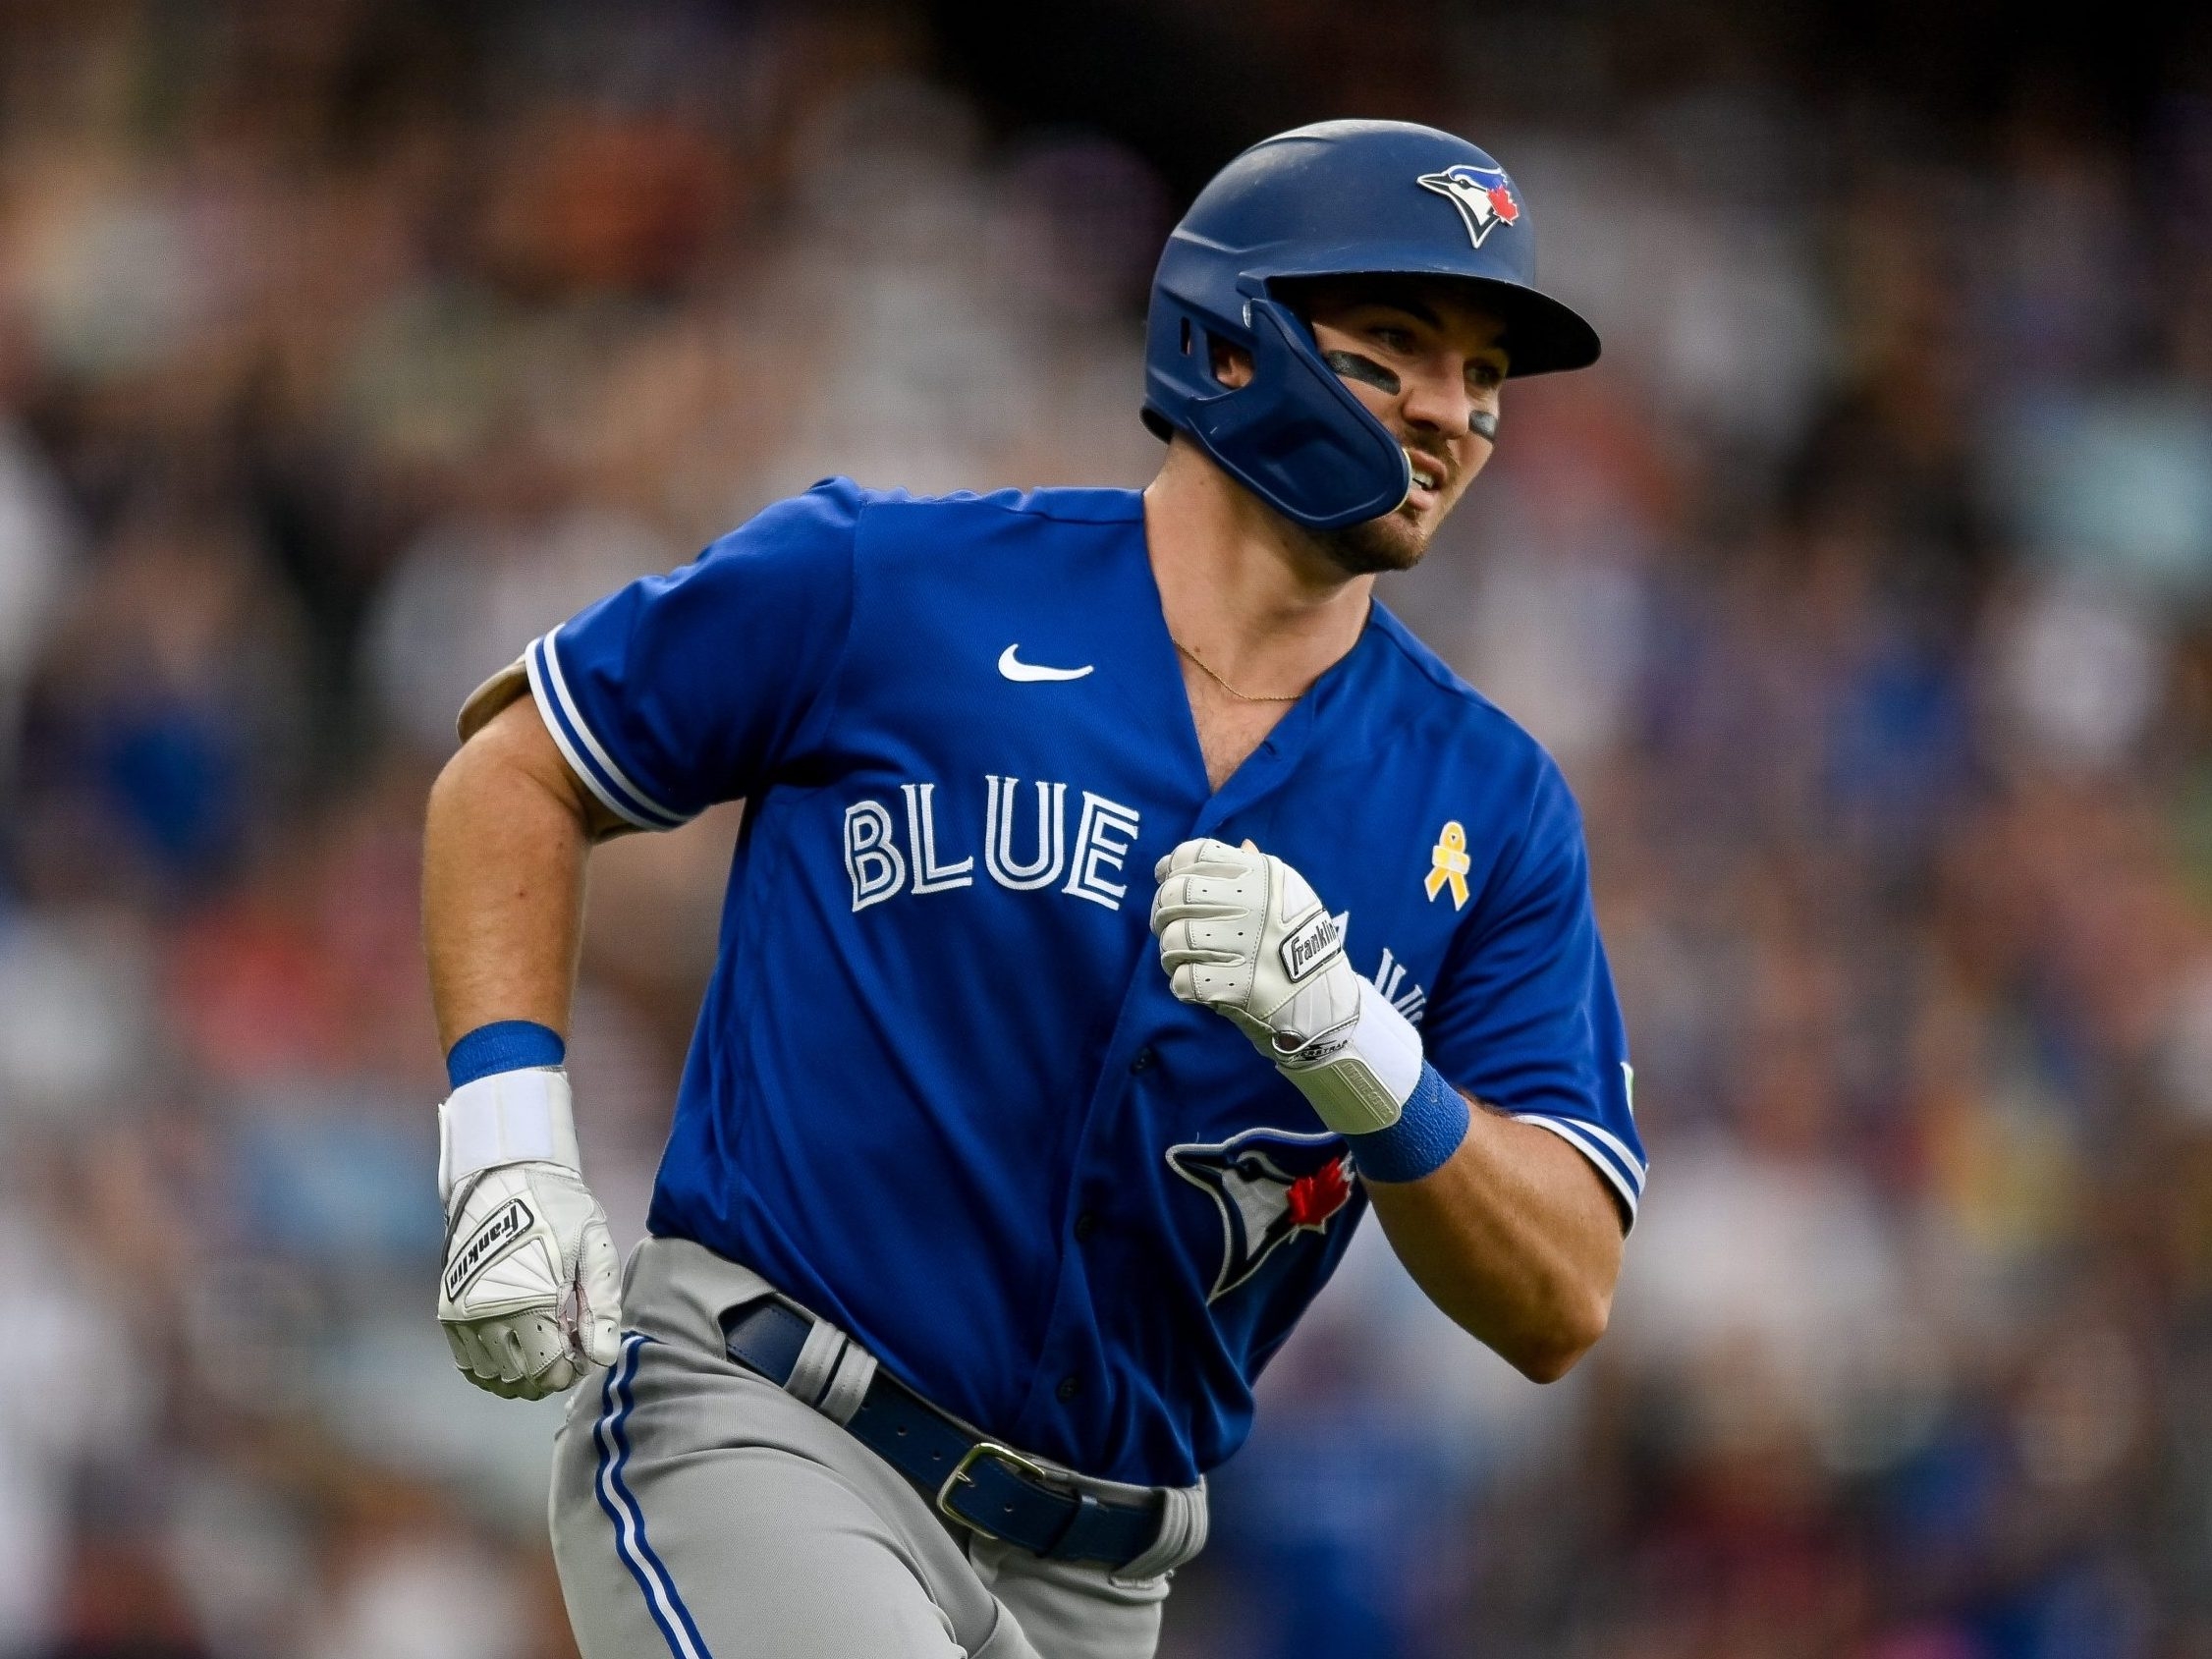 Jays survive scare by thinnest of margins to win against Rockies